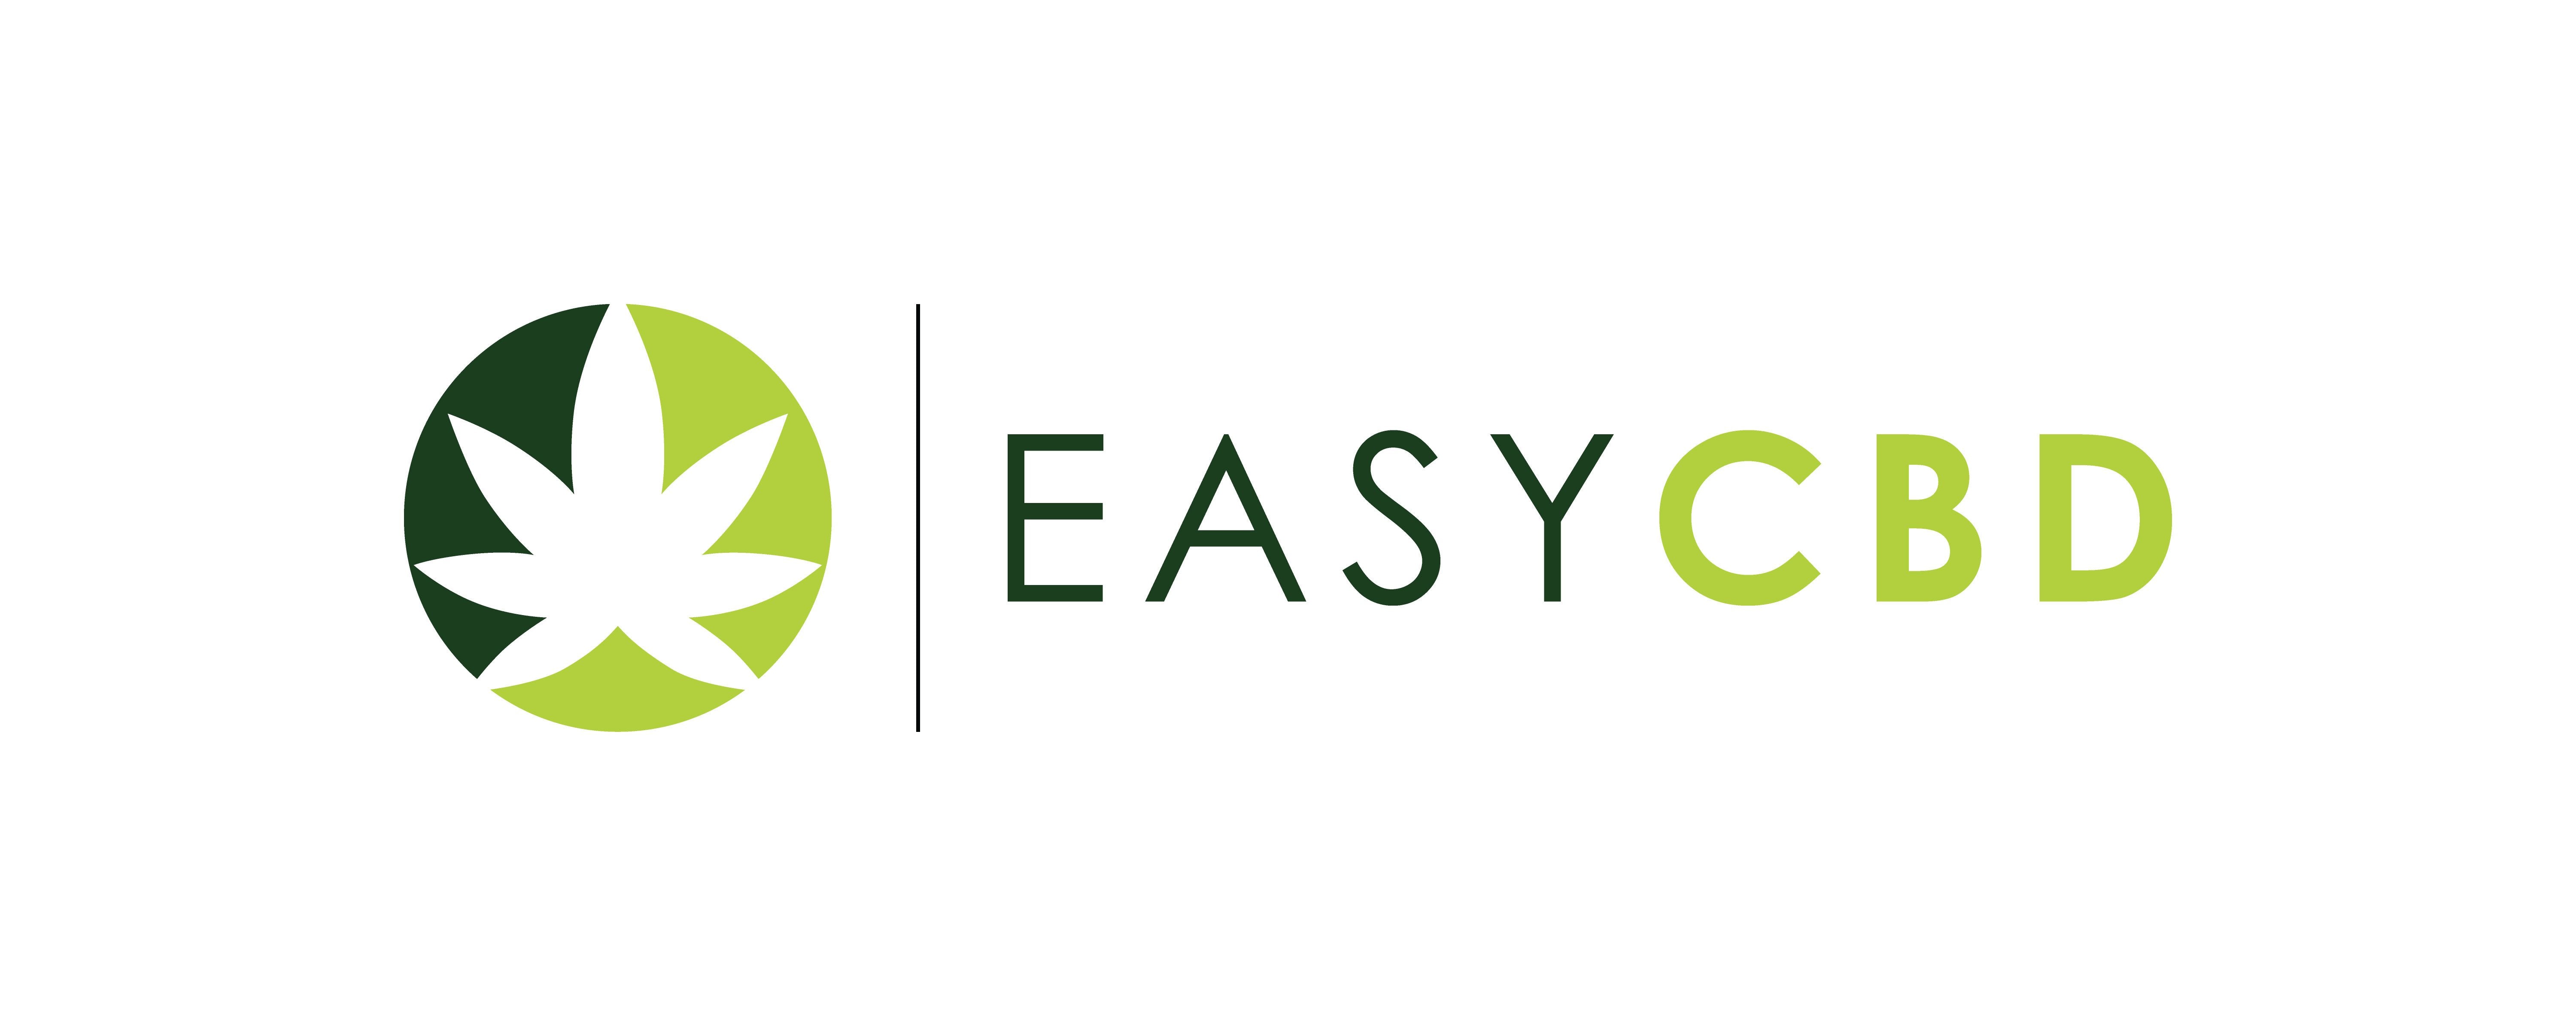 Welcome to EasyCBD